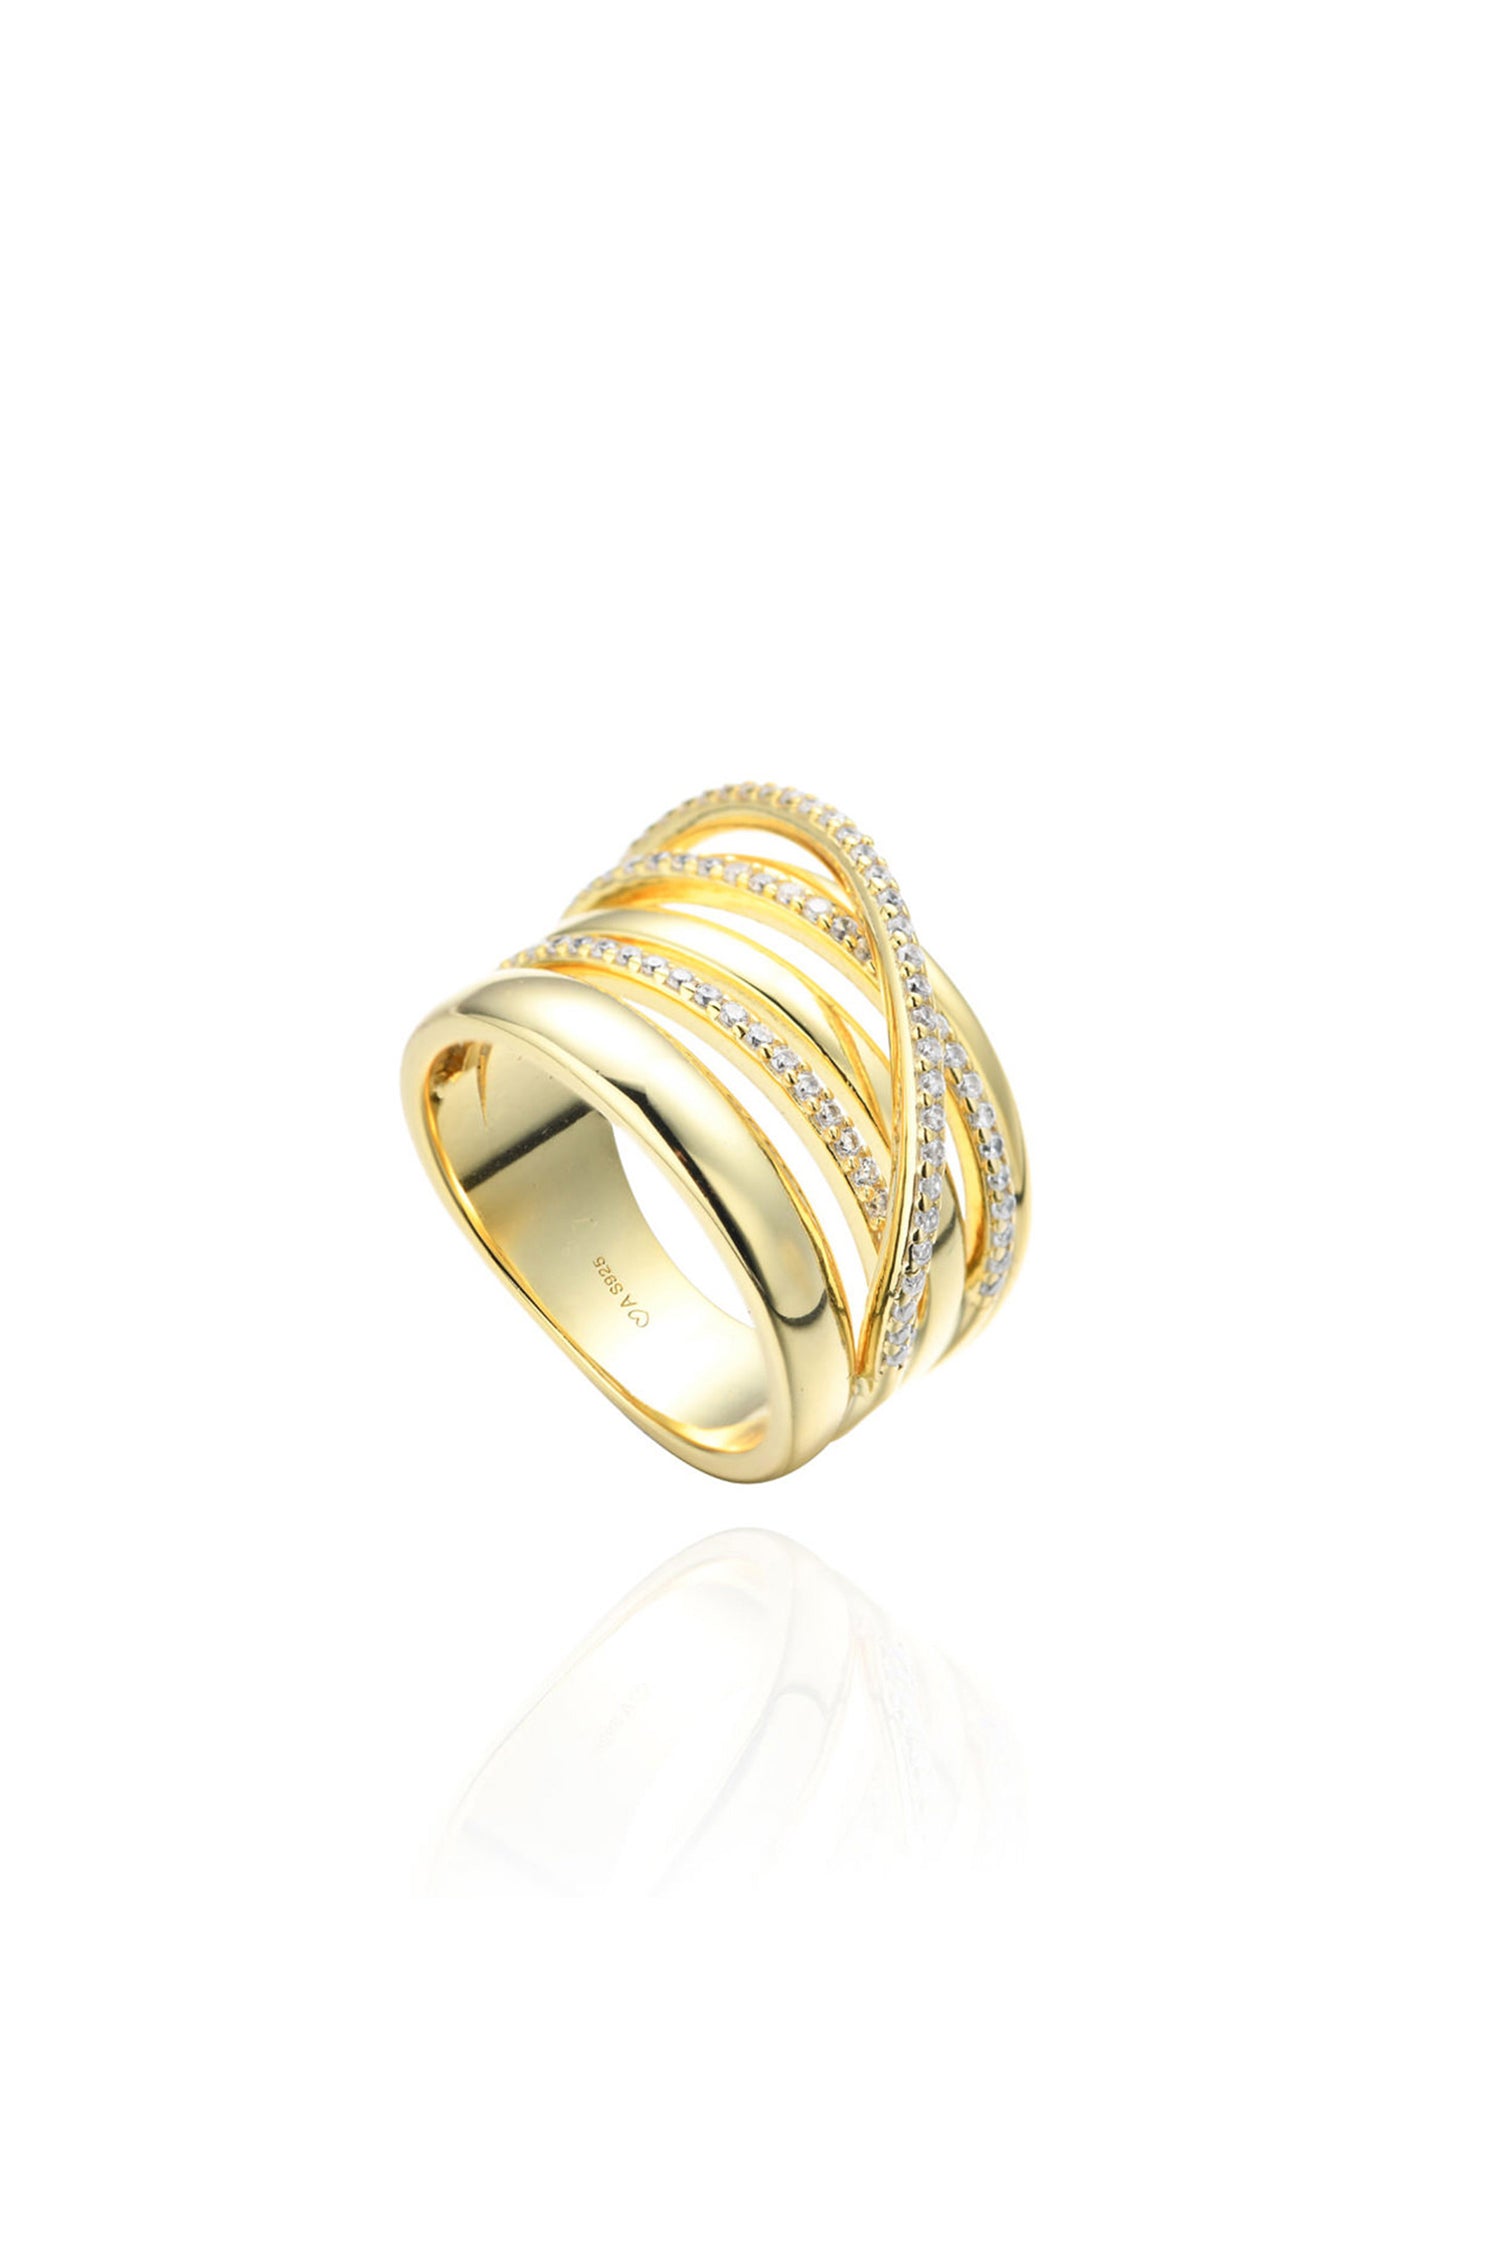  Wrap Cocktail Ring 14k Gold Plated Sterling Silver White Background